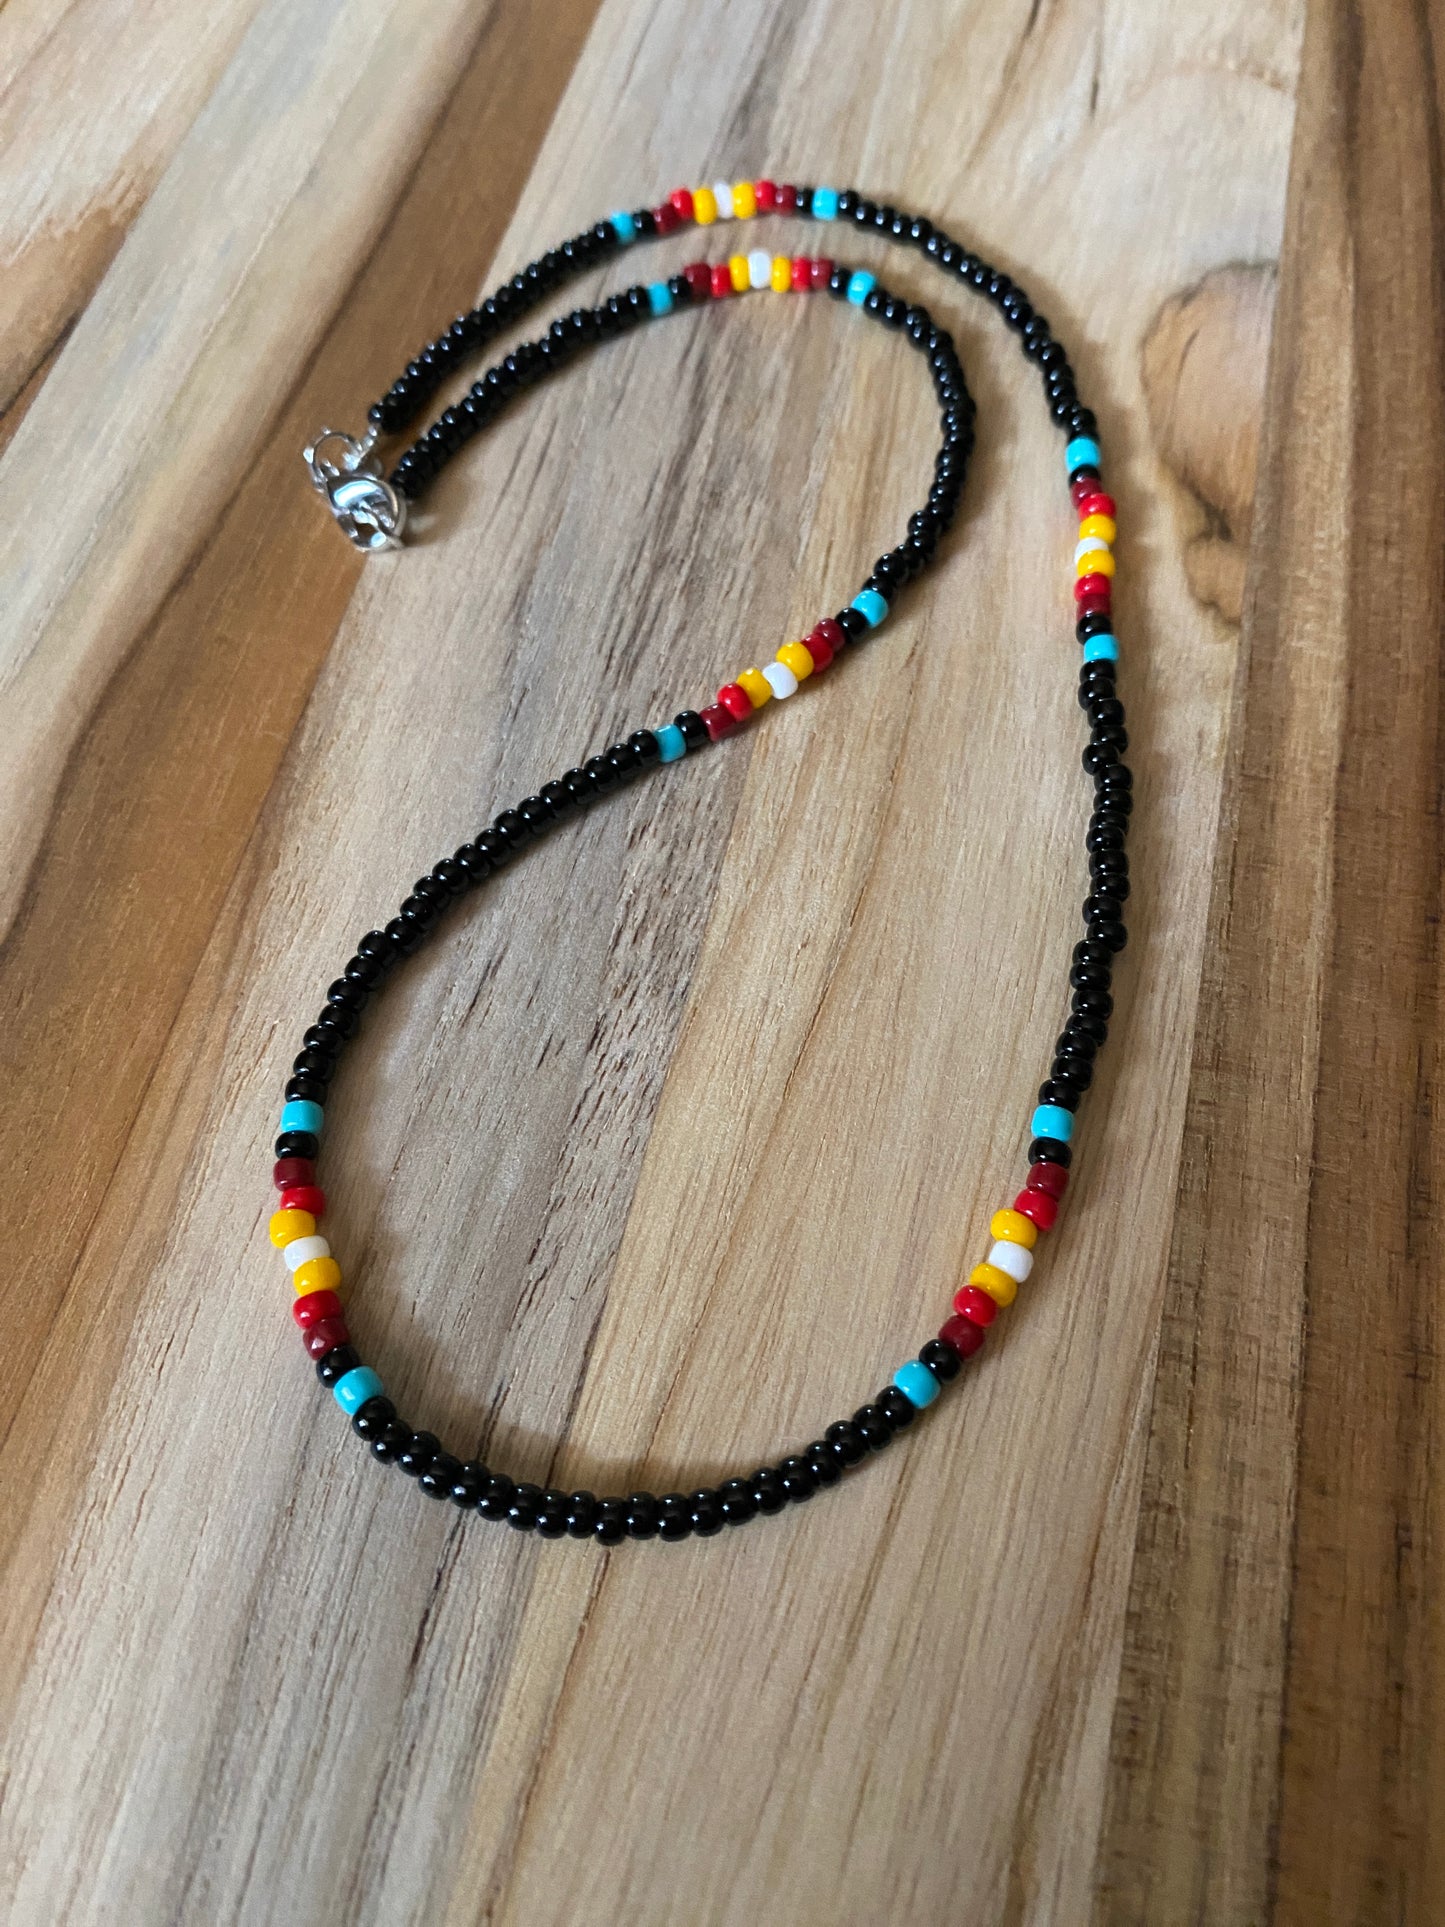 Dainty Native Inspired Minimalist Black Seed Bead Multi Colored Necklace